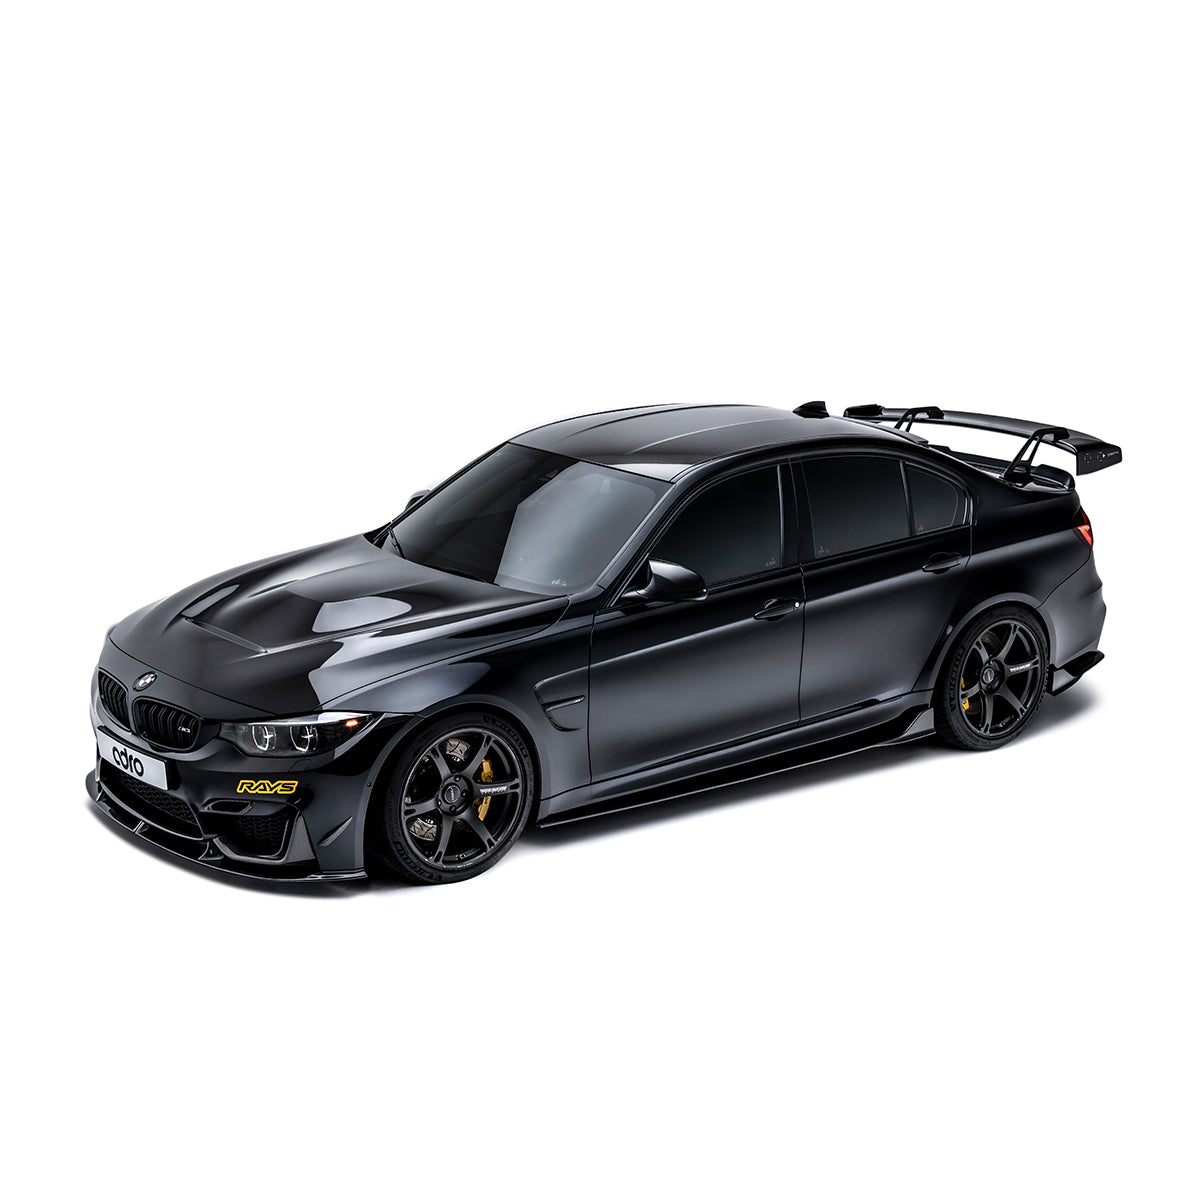 BMW F80 M3 AT-R1 Swan Neck GT Wing - ADRO 